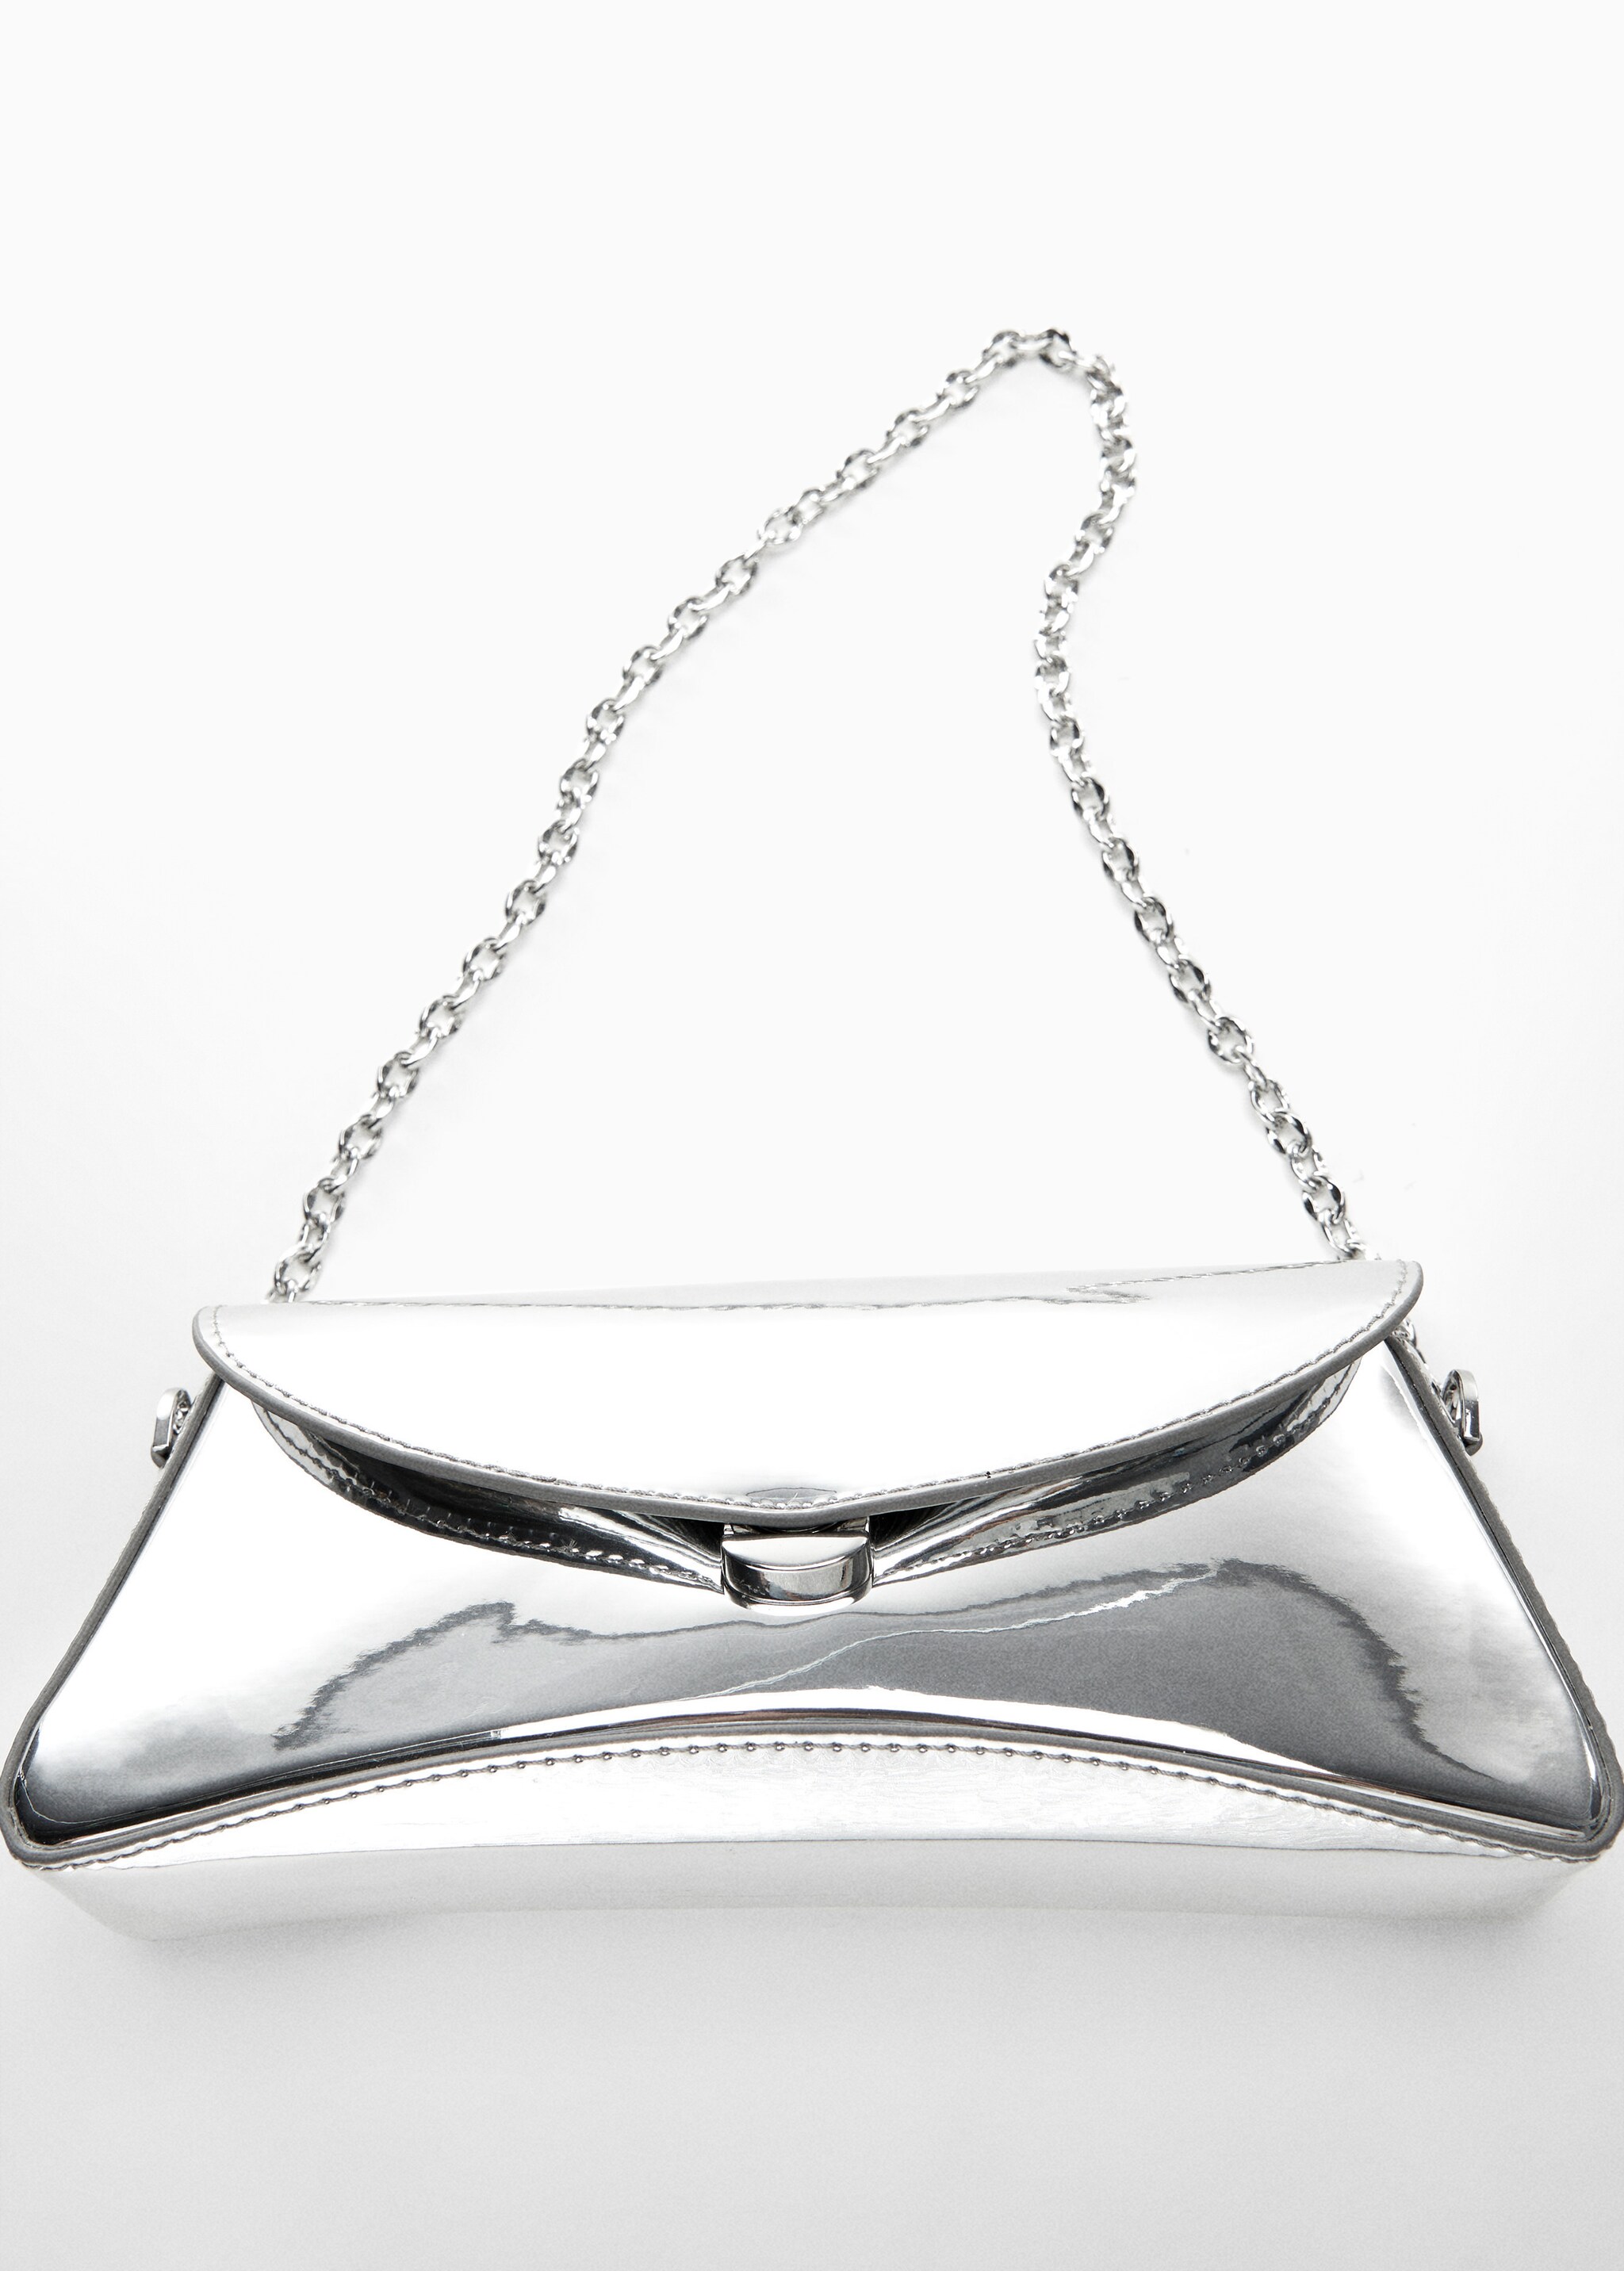 Patent leather chain handbag - Details of the article 5